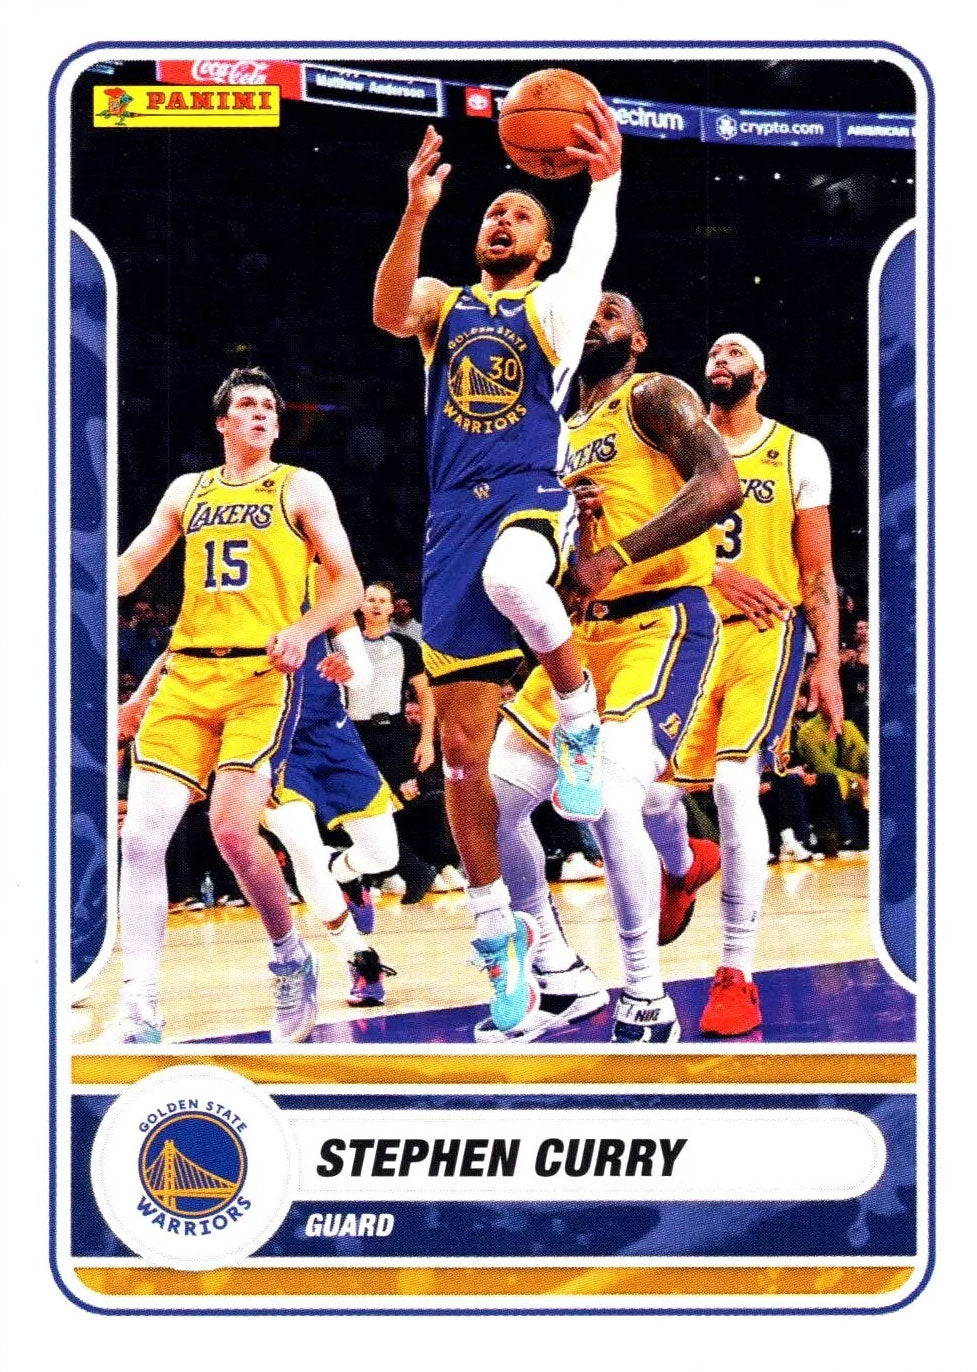 Stephen Curry 2023 2024 Panini Limited Edition Full Sized Sticker Card Series Mint Card #92